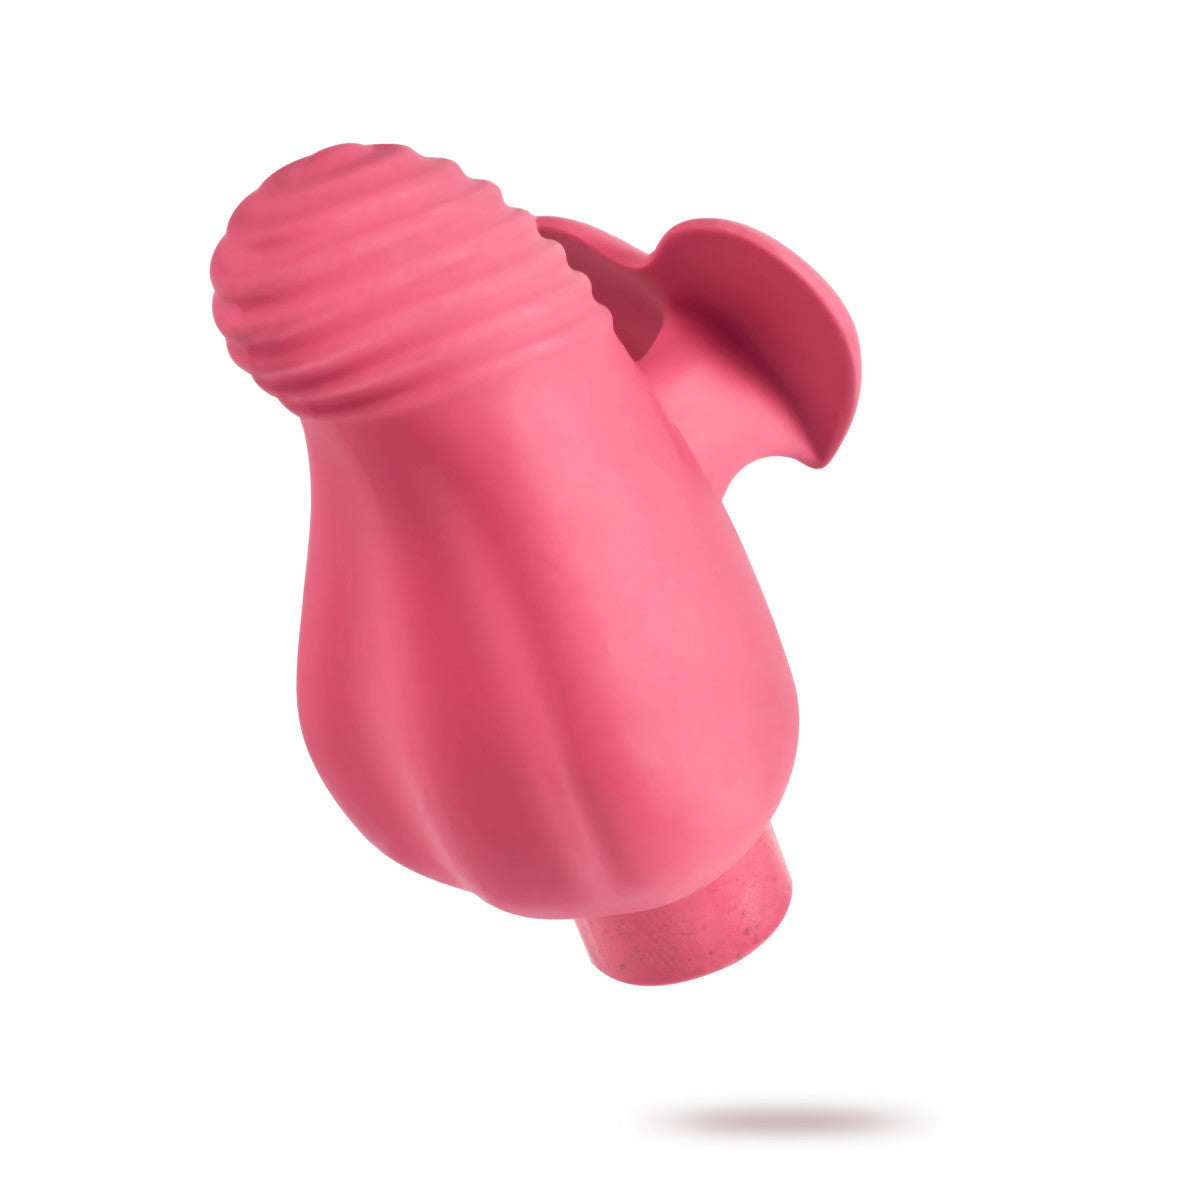 Gaia | Eco Love: Plant-Based 3" Waterproof Multifunction Powerful Vibrator in Coral - Sustainably Made with BioTouch & BioFeel 基於植物的 3 英寸防水多功能珊瑚振動器